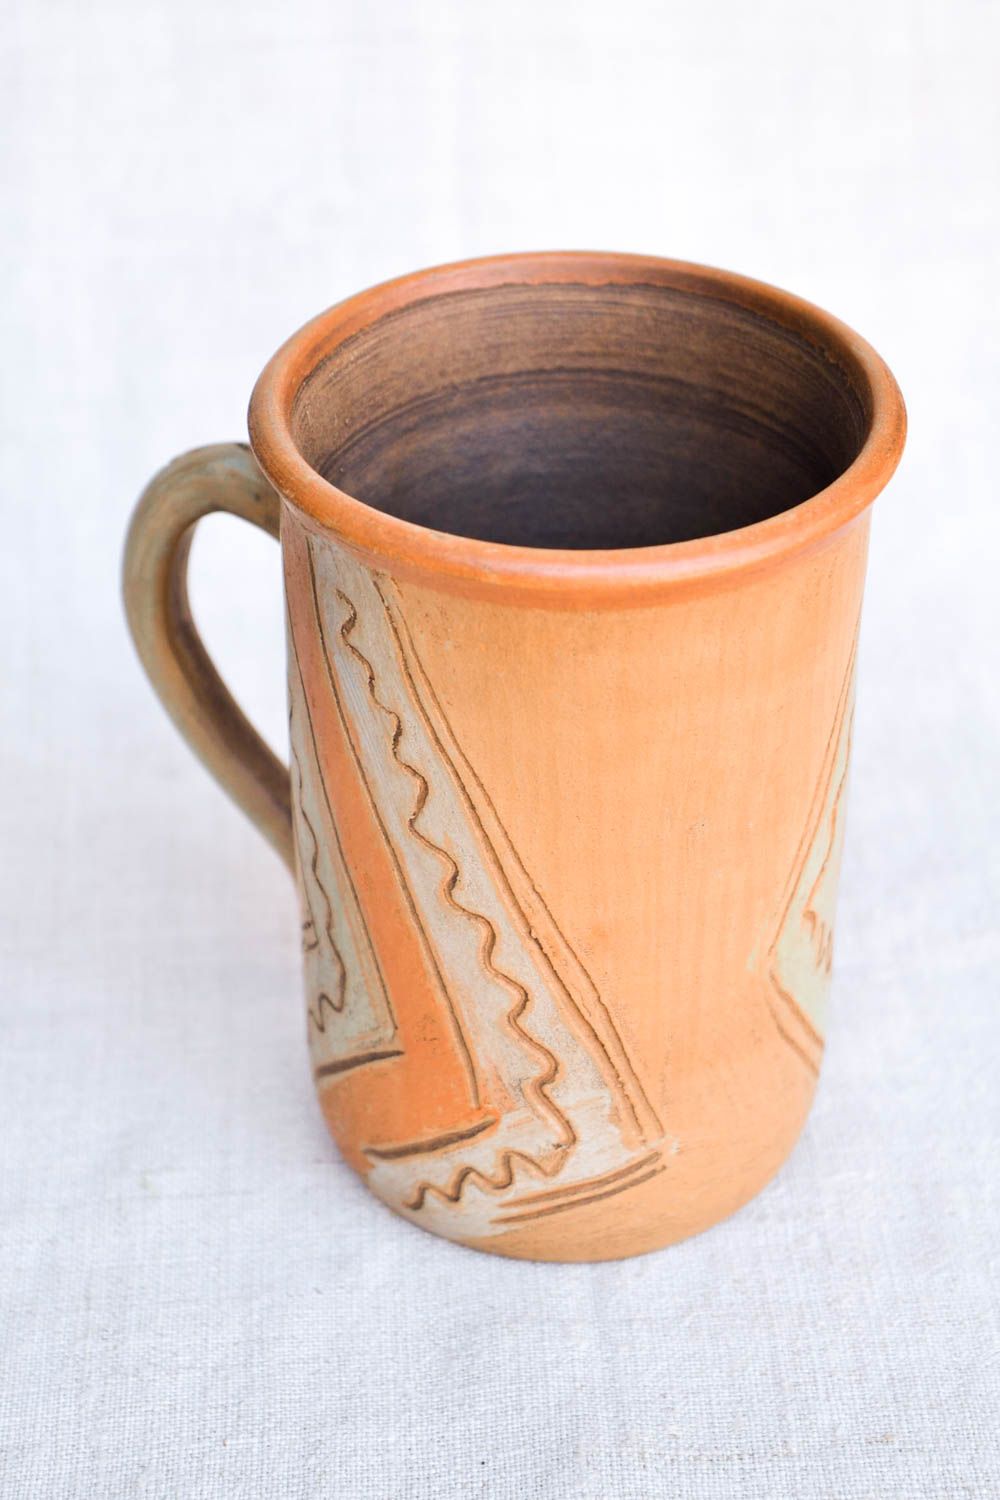 XL 12 oz clay tall teacup in olive, brown color and handle photo 4